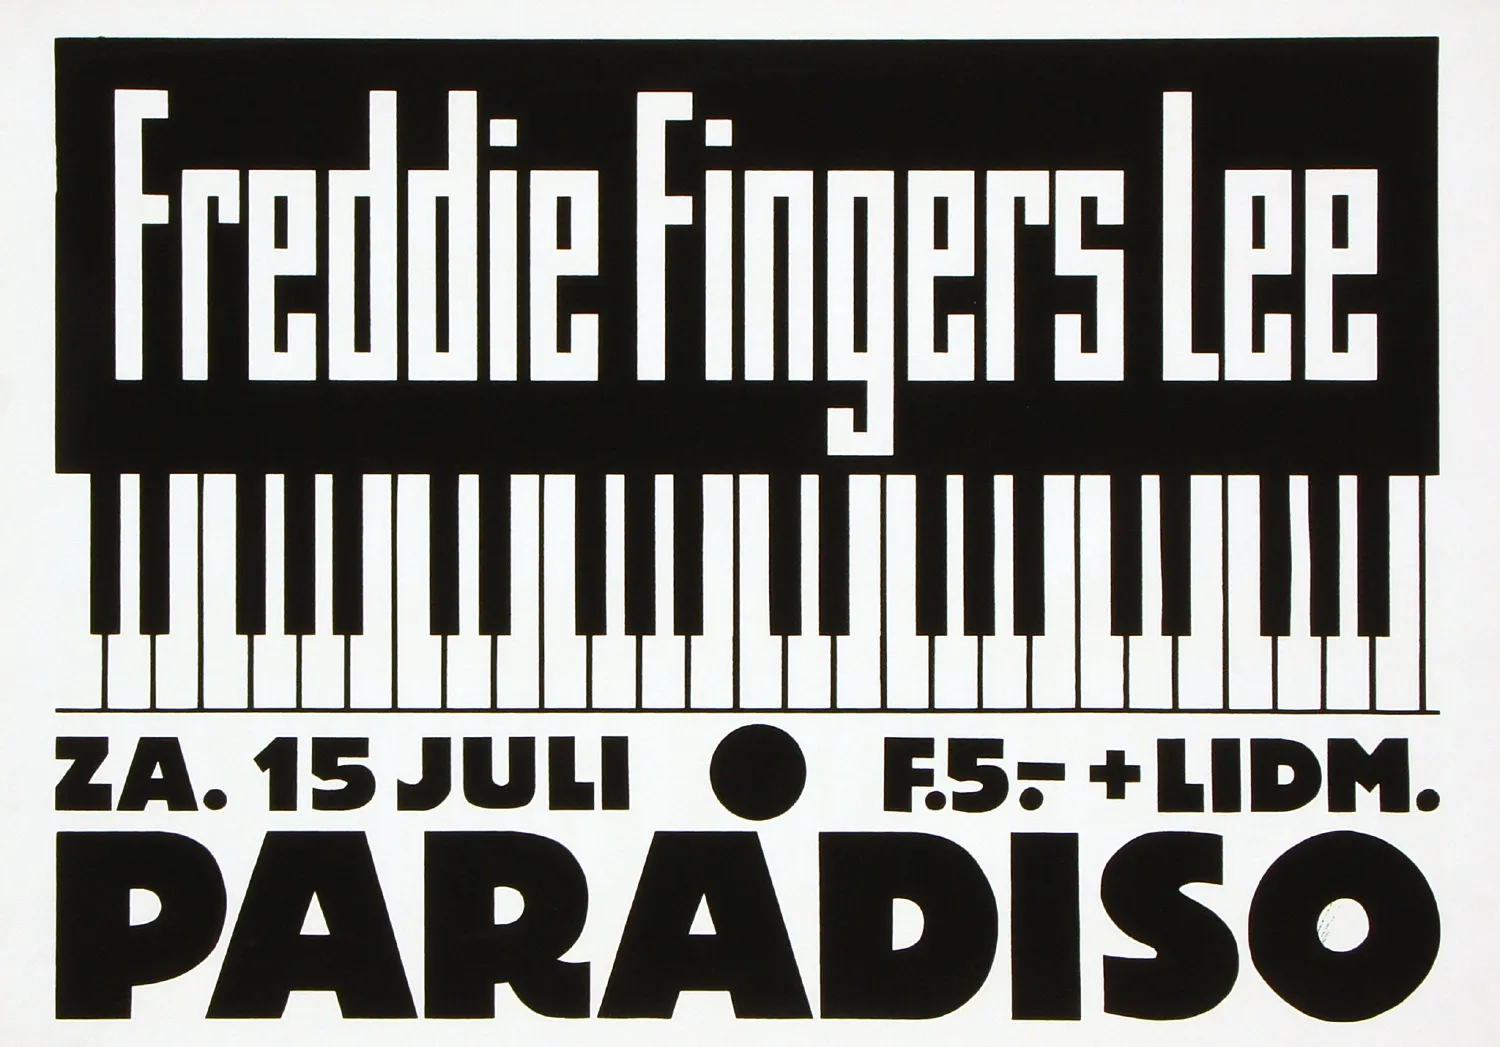 Featured image for “Freddie Fingers Lee 1978”